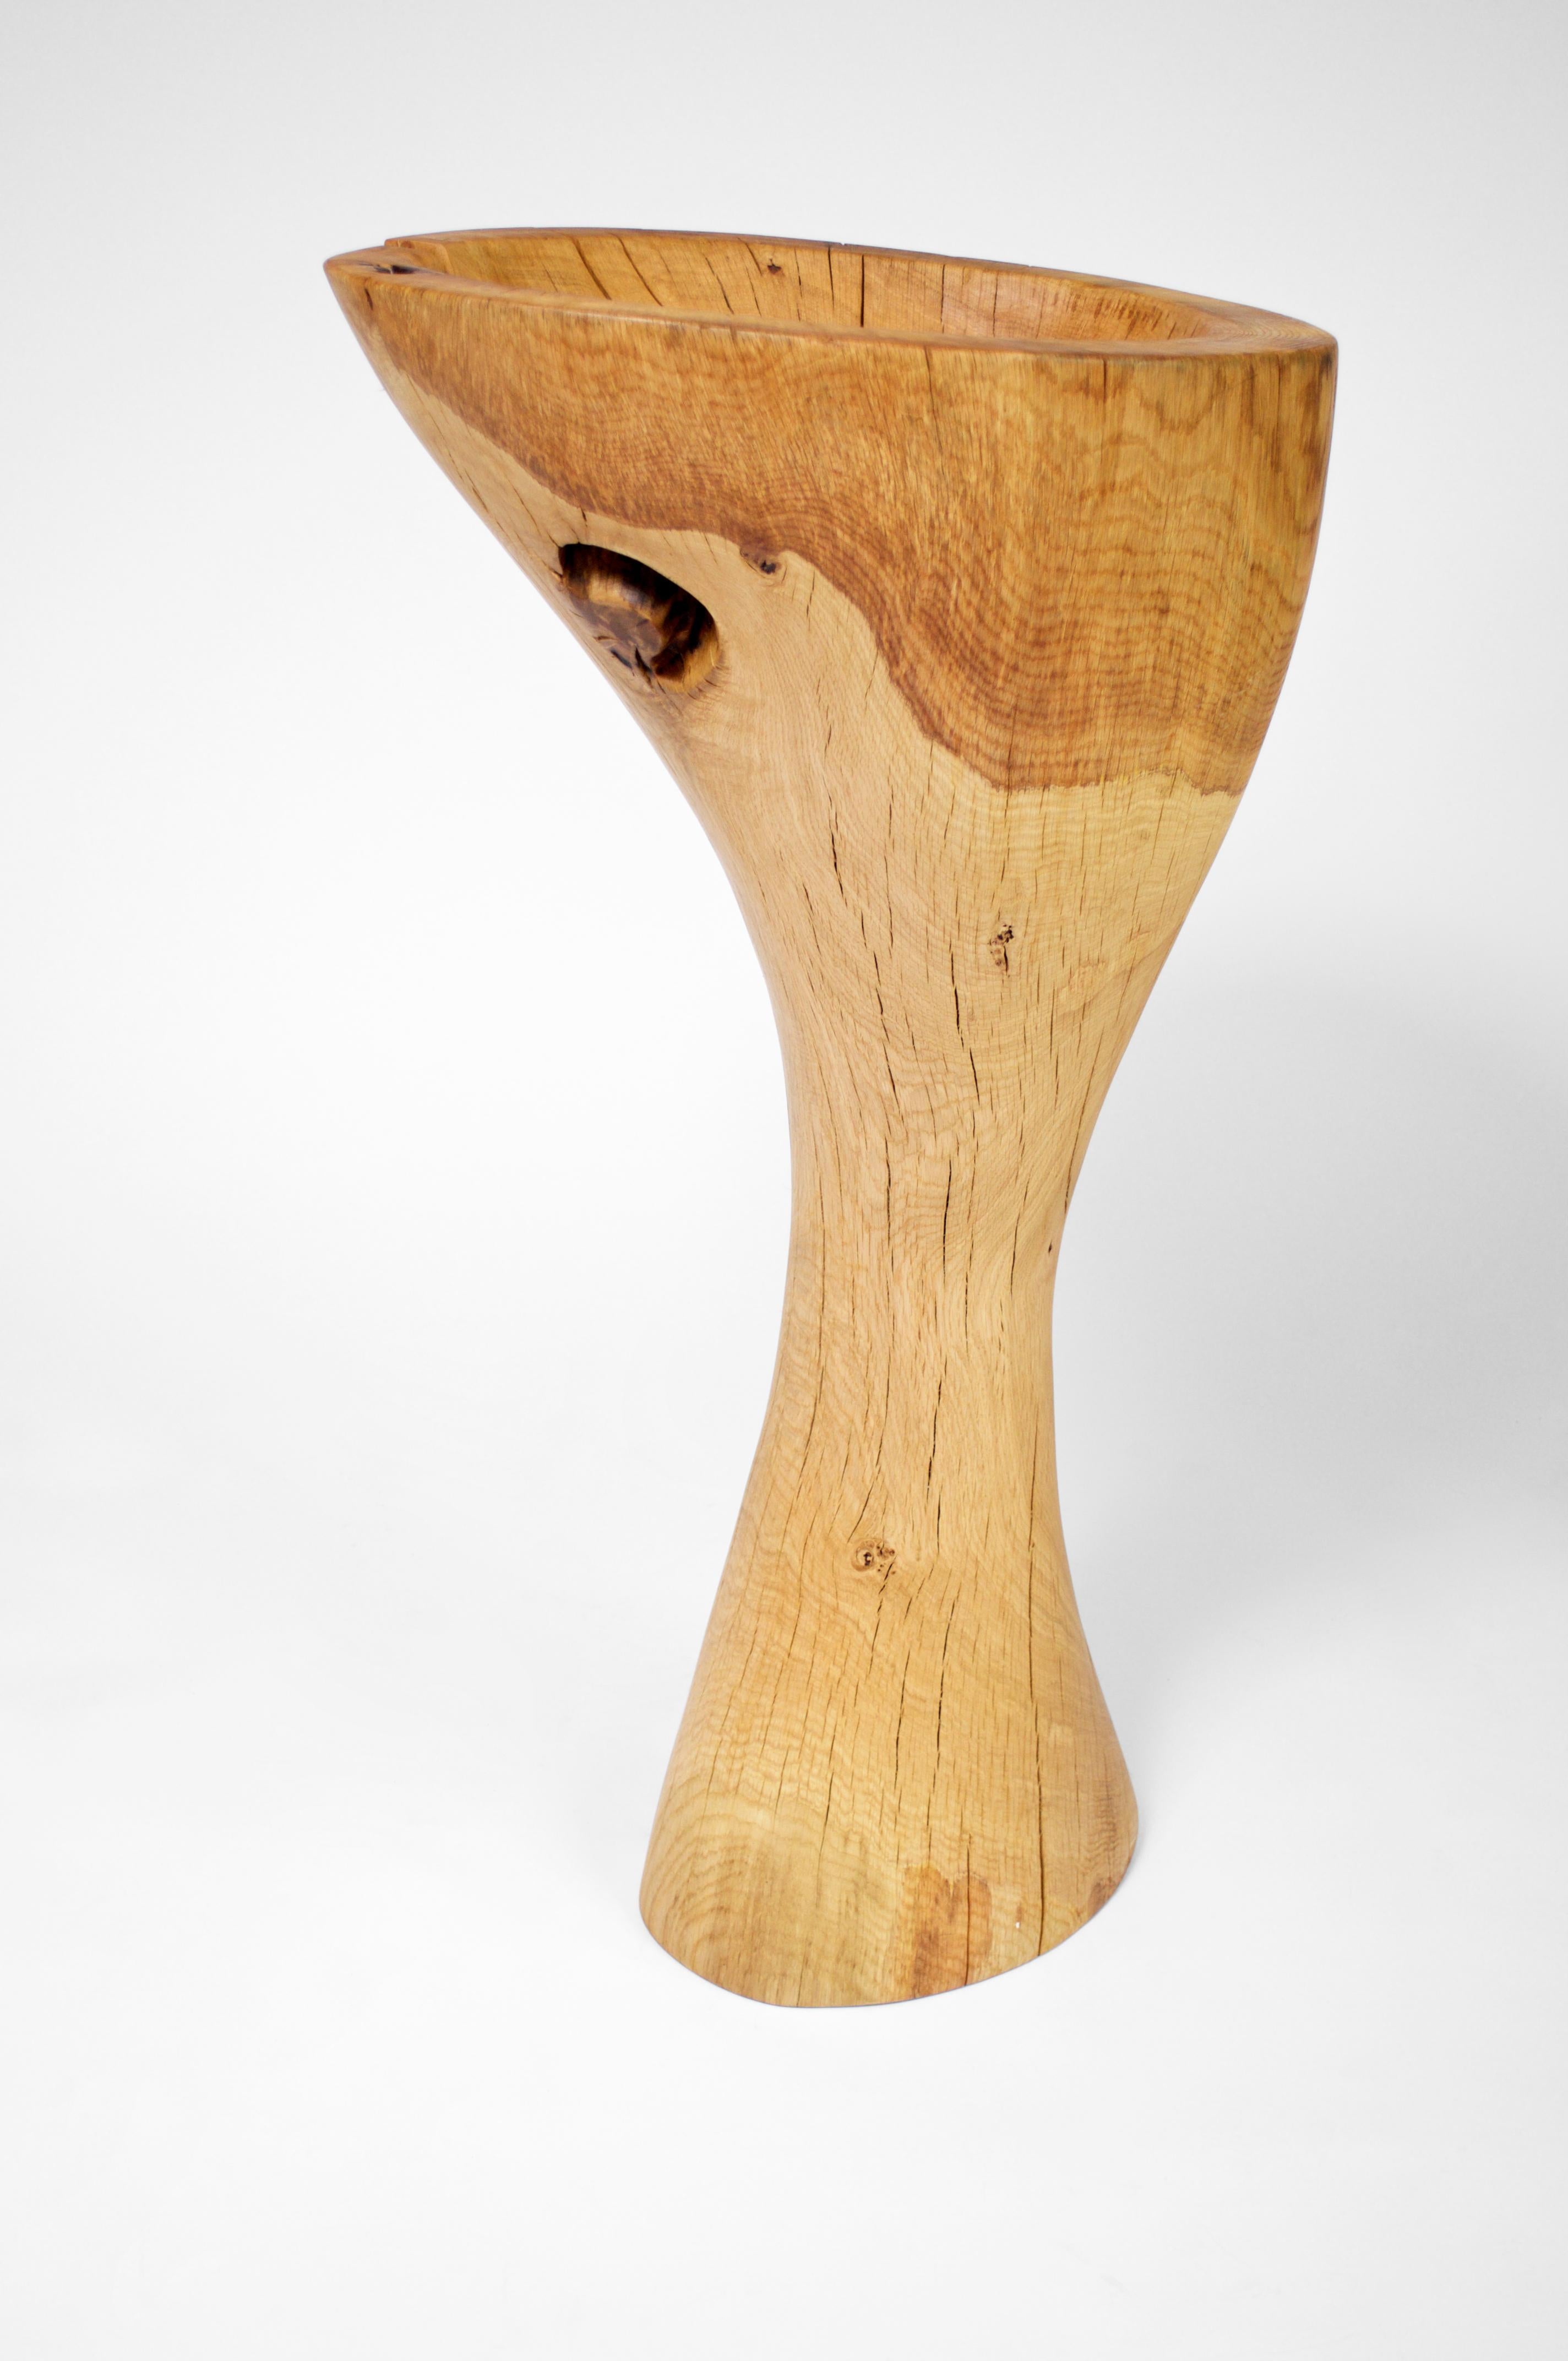 Oak vessel 1245 by Jörg Pietschmann
Dimensions: D 53 x W 47 x H 104 cm 
Materials: Oak. 
Finish: Polished oil finish.


Carved out of from a curved oak trunk.
In Pietschmann’s sculptures, trees that for centuries were part of a landscape and